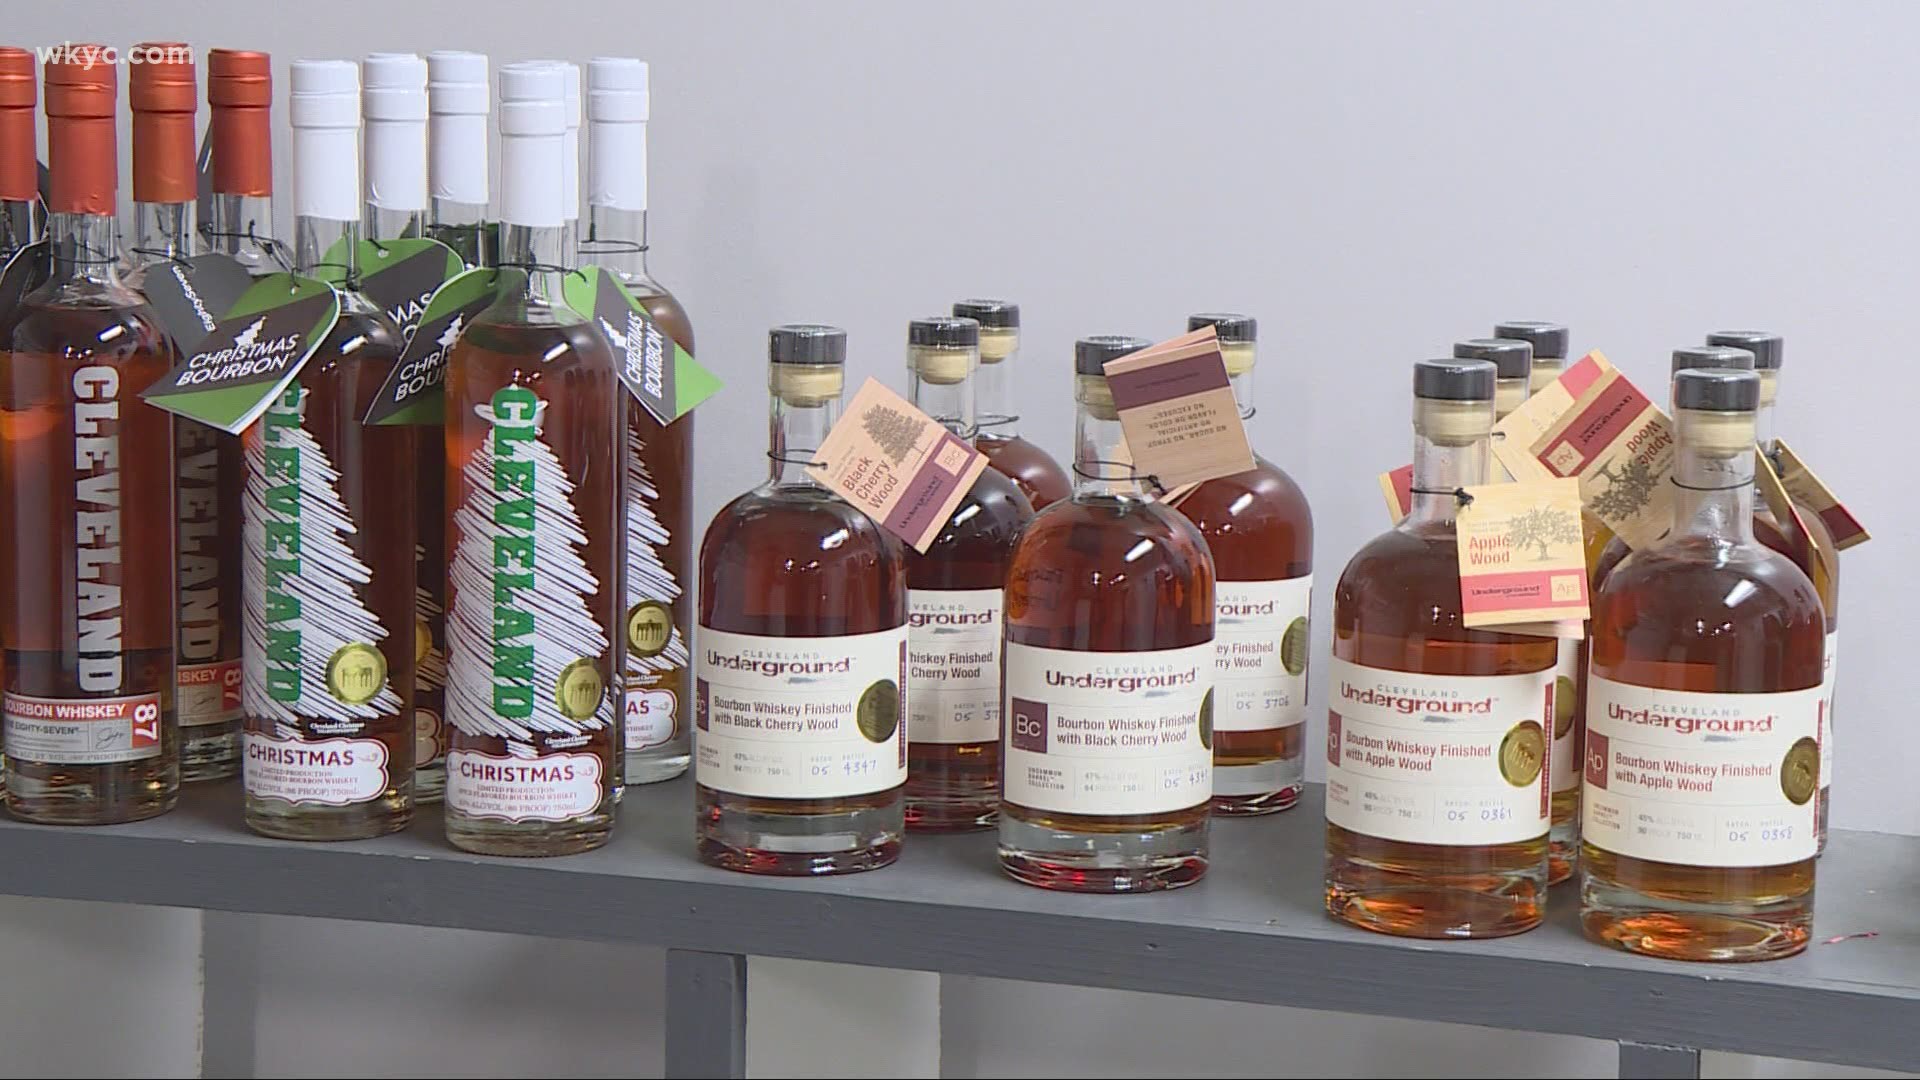 An bill allowing the home delivery of distilled spirits was passed on Tuesday by the Ohio legislature. The bill heads to Gov. Mike DeWine for approval.